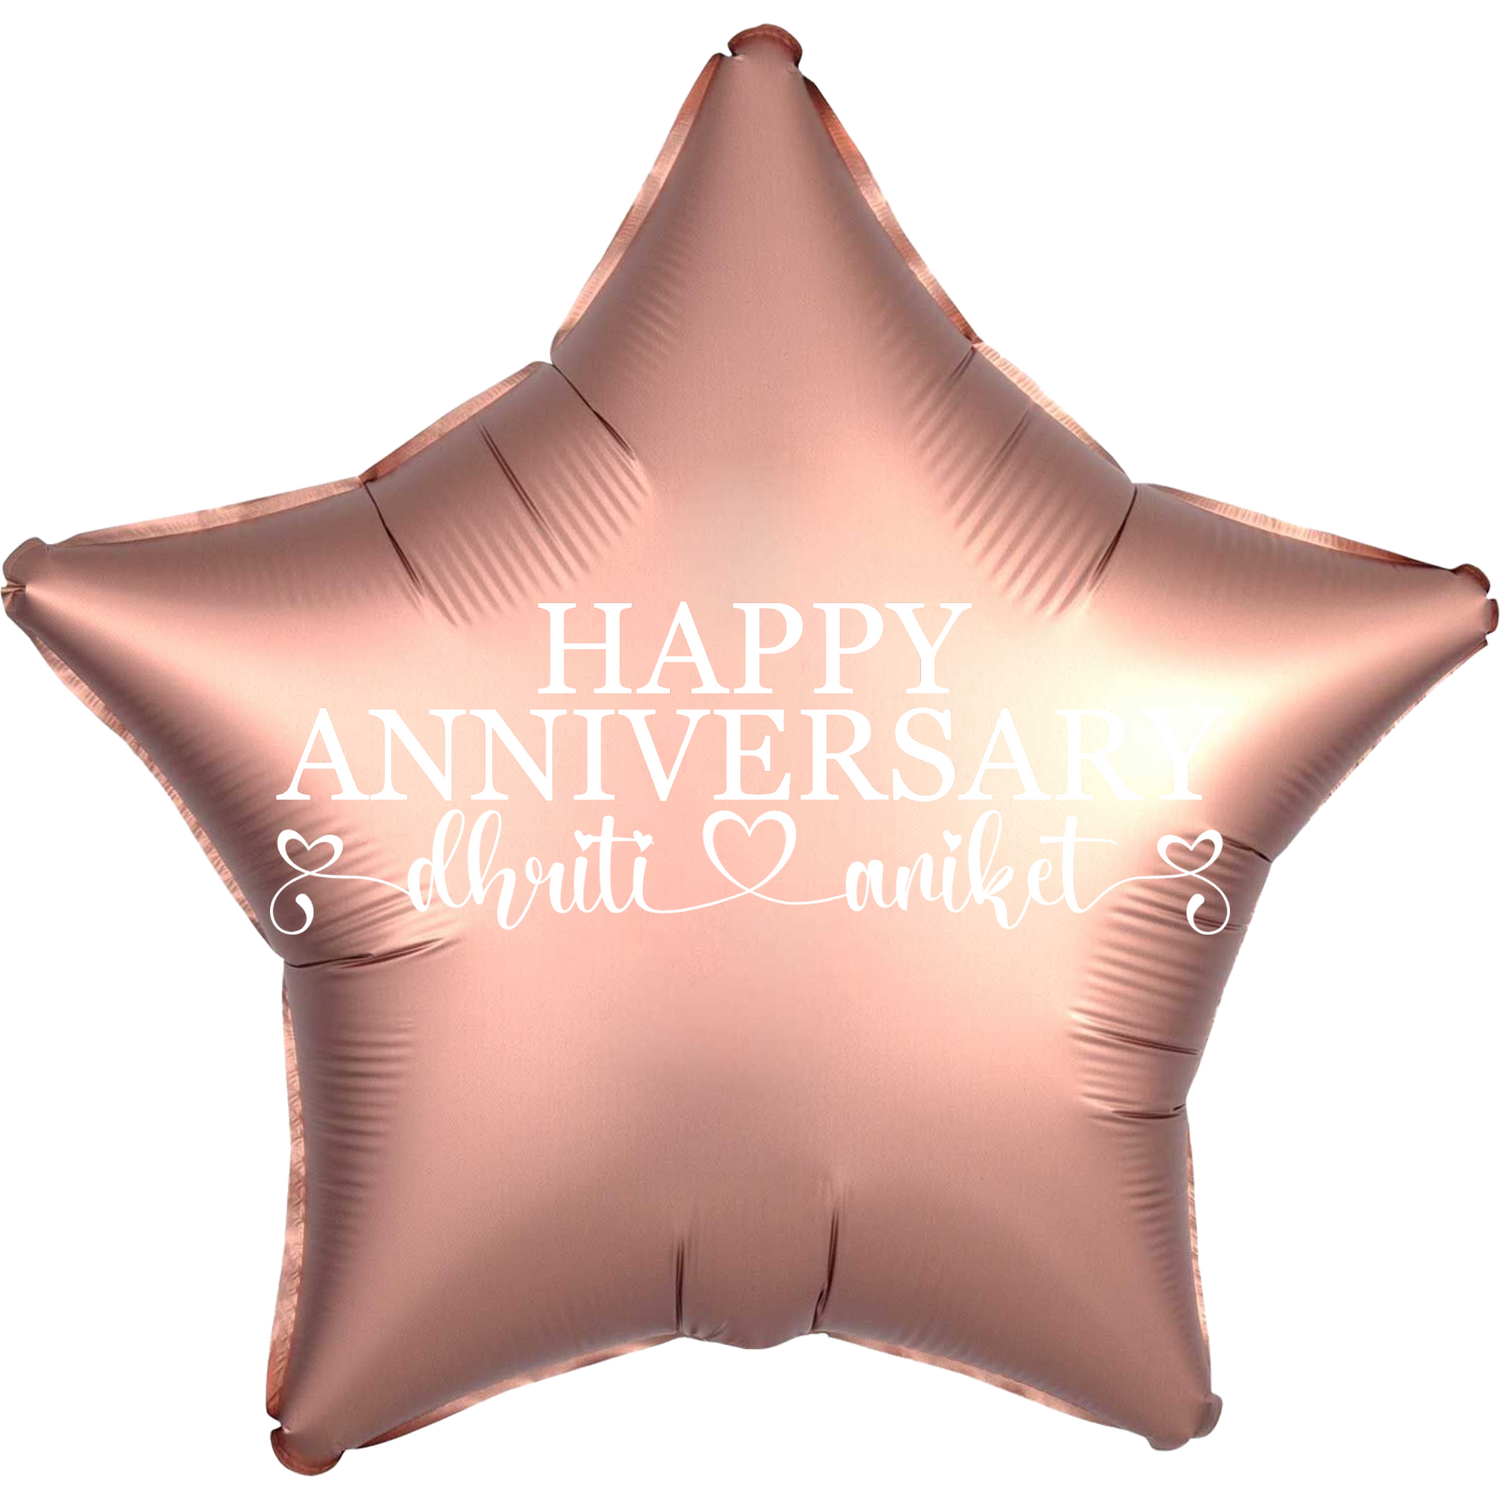 Custom Name/Text/Message Rose Gold Star Balloons For First Wedding Anniversary, 2nd/3rd/5th/10th/15th/20th/25th/30th/35th/40th/45th/50th/55th/60th/65th/75th Marriage Anniversary And Wedding Milestones. Supports Helium/Air, Luxury Bespoke Balloons Make Perfect Decoration Supplies & Surprise For Your Husband/Wife/Partner/Other-Half.